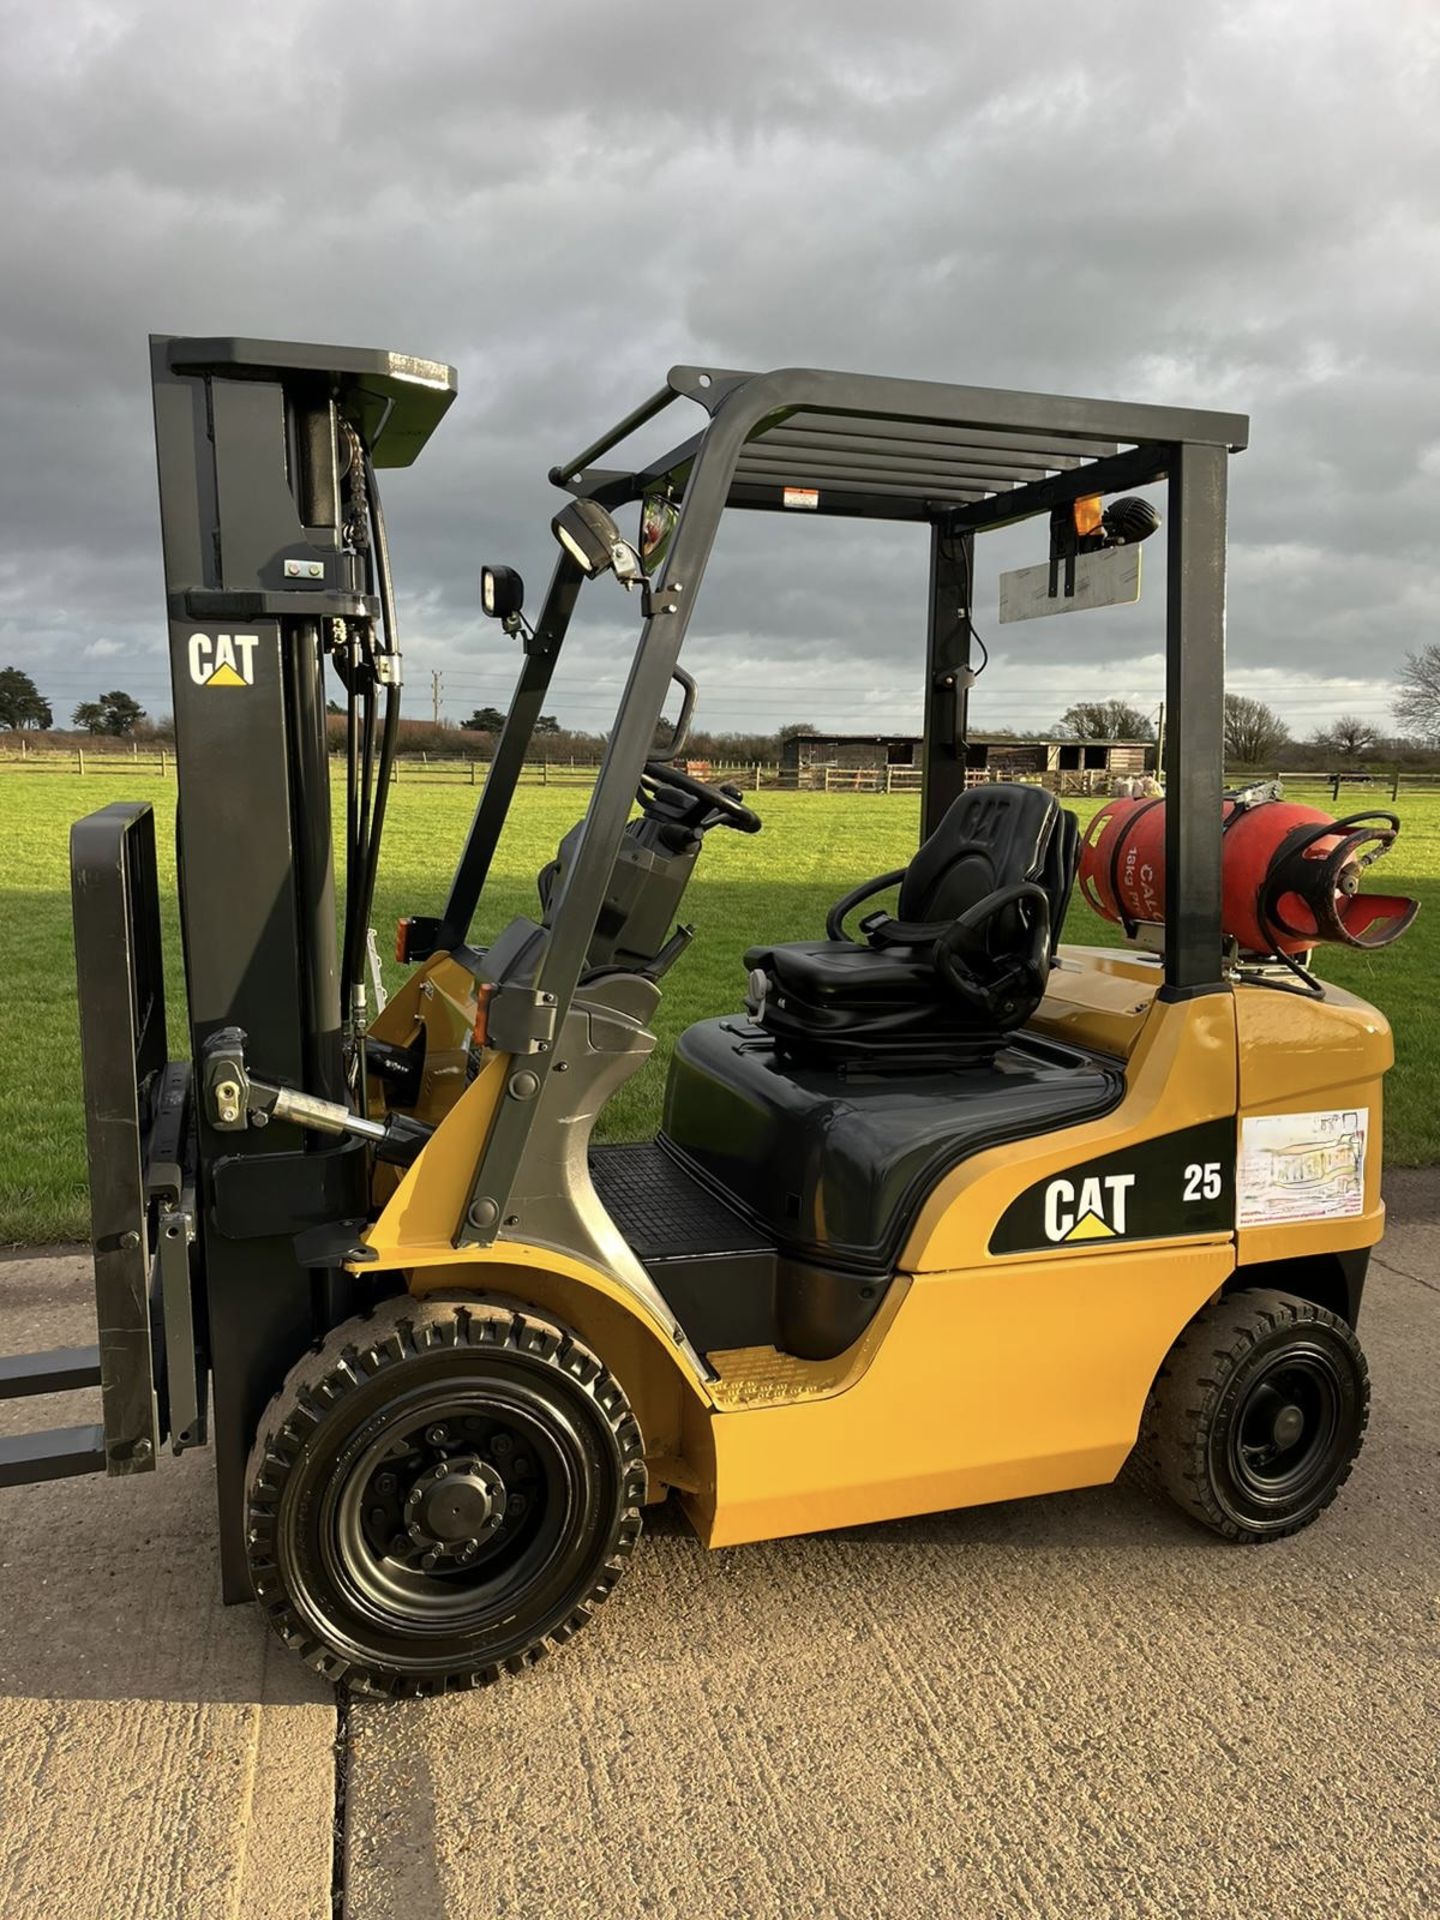 2017, CATERPILLAR 2.5 Tonne Gas Forklift (Container) Triple Mast - Image 8 of 10